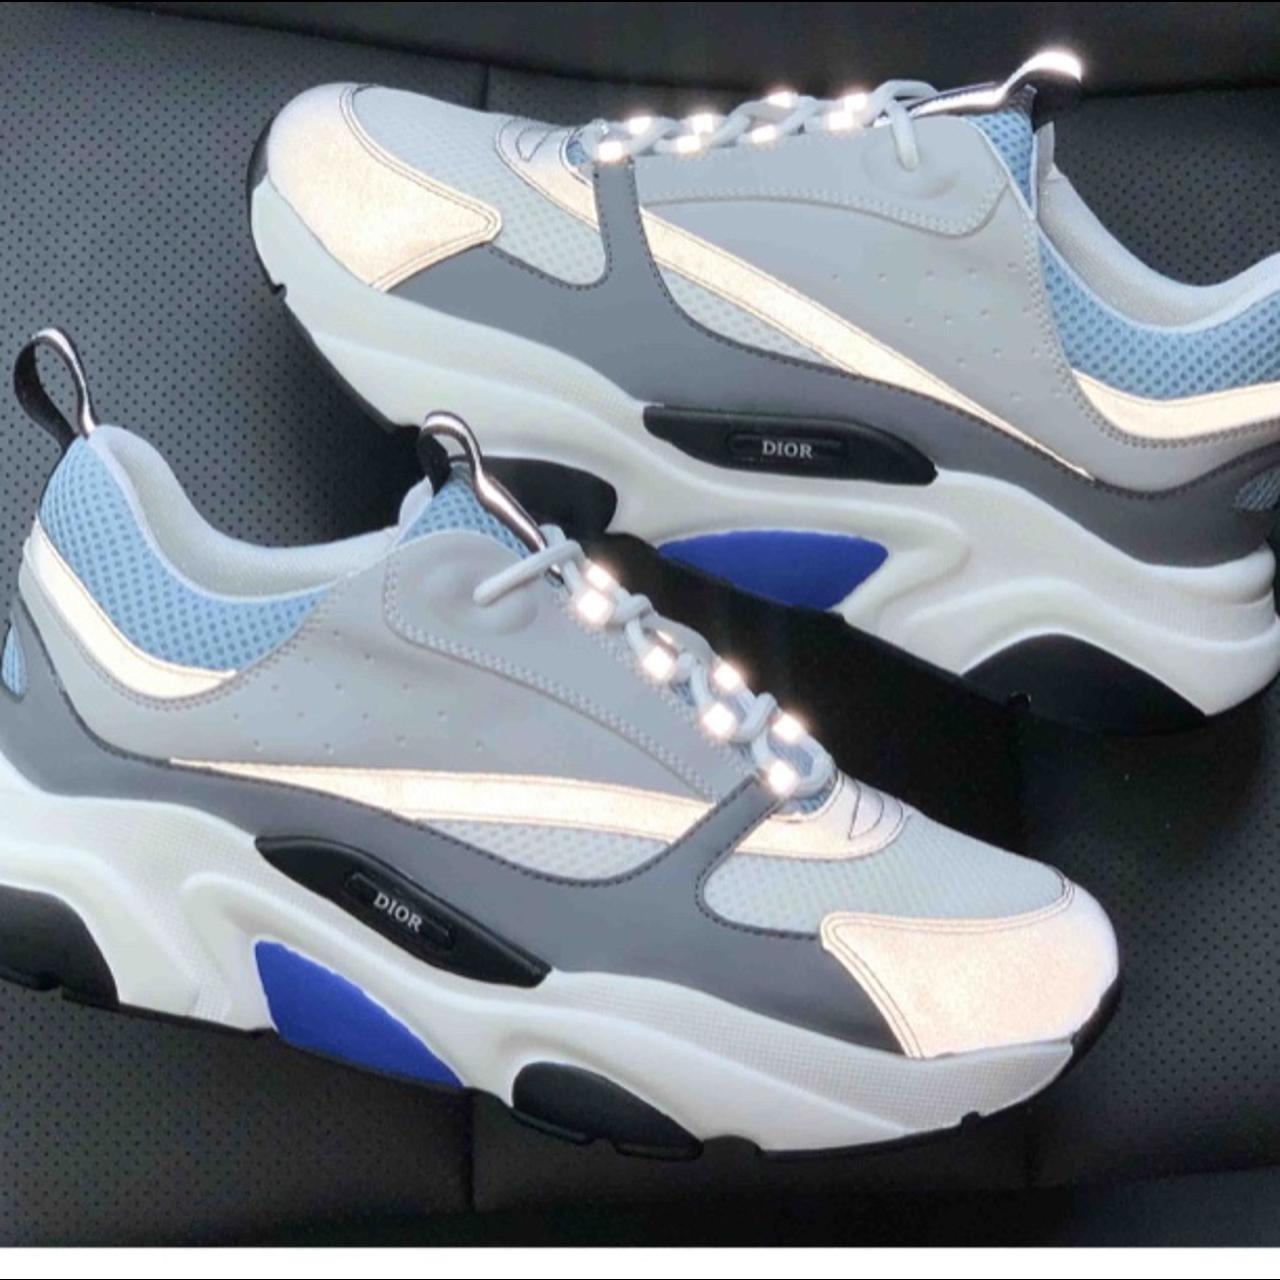 Let's Closer To The Dior B22 Blue/White sneaker